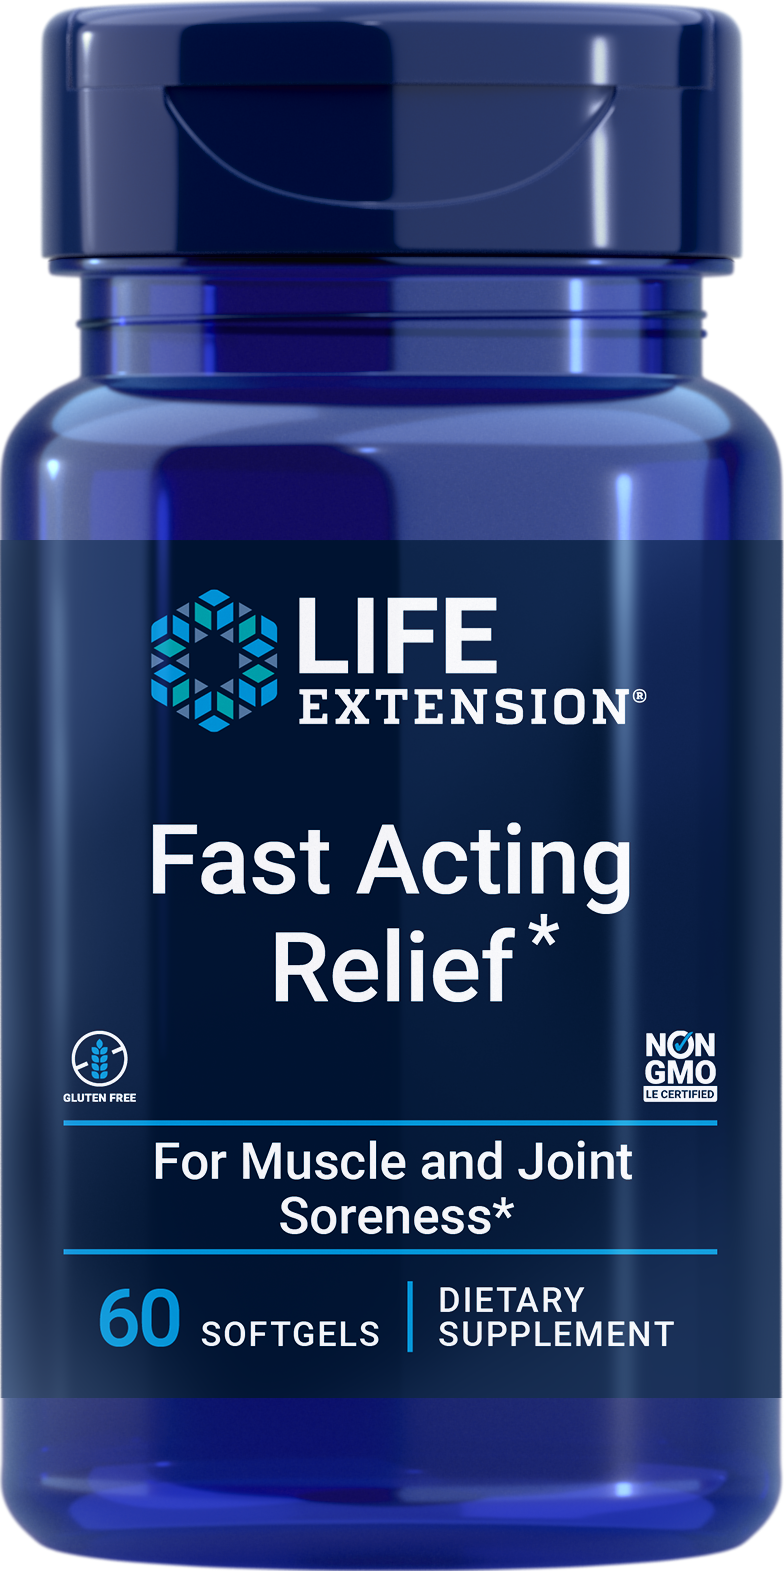 Life Extension Fast Acting Relief 60 Softgels - Muscle and Joint. Get it FAST!